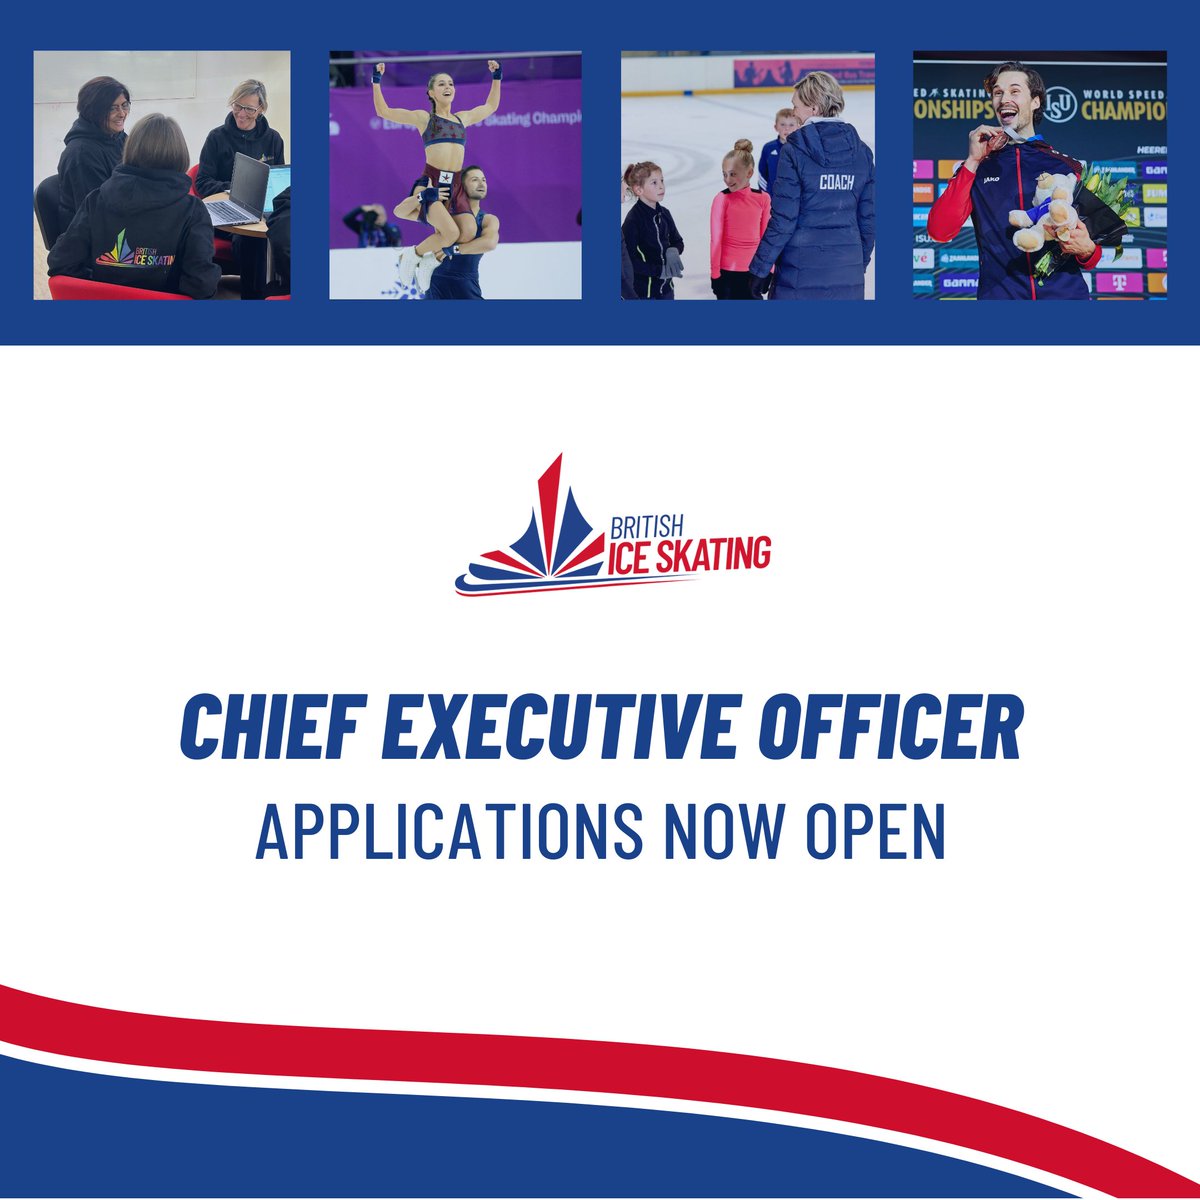 We're looking to appoint an inspiring leader to help us take ice skating to new heights! Applications are now open for the role of BIS Chief Executive Officer. Find out more: iceskating.org.uk/work-with-us Applications close 10th June. #WorkWithUs #ExecutiveVacancy #JobsInSport #CEO